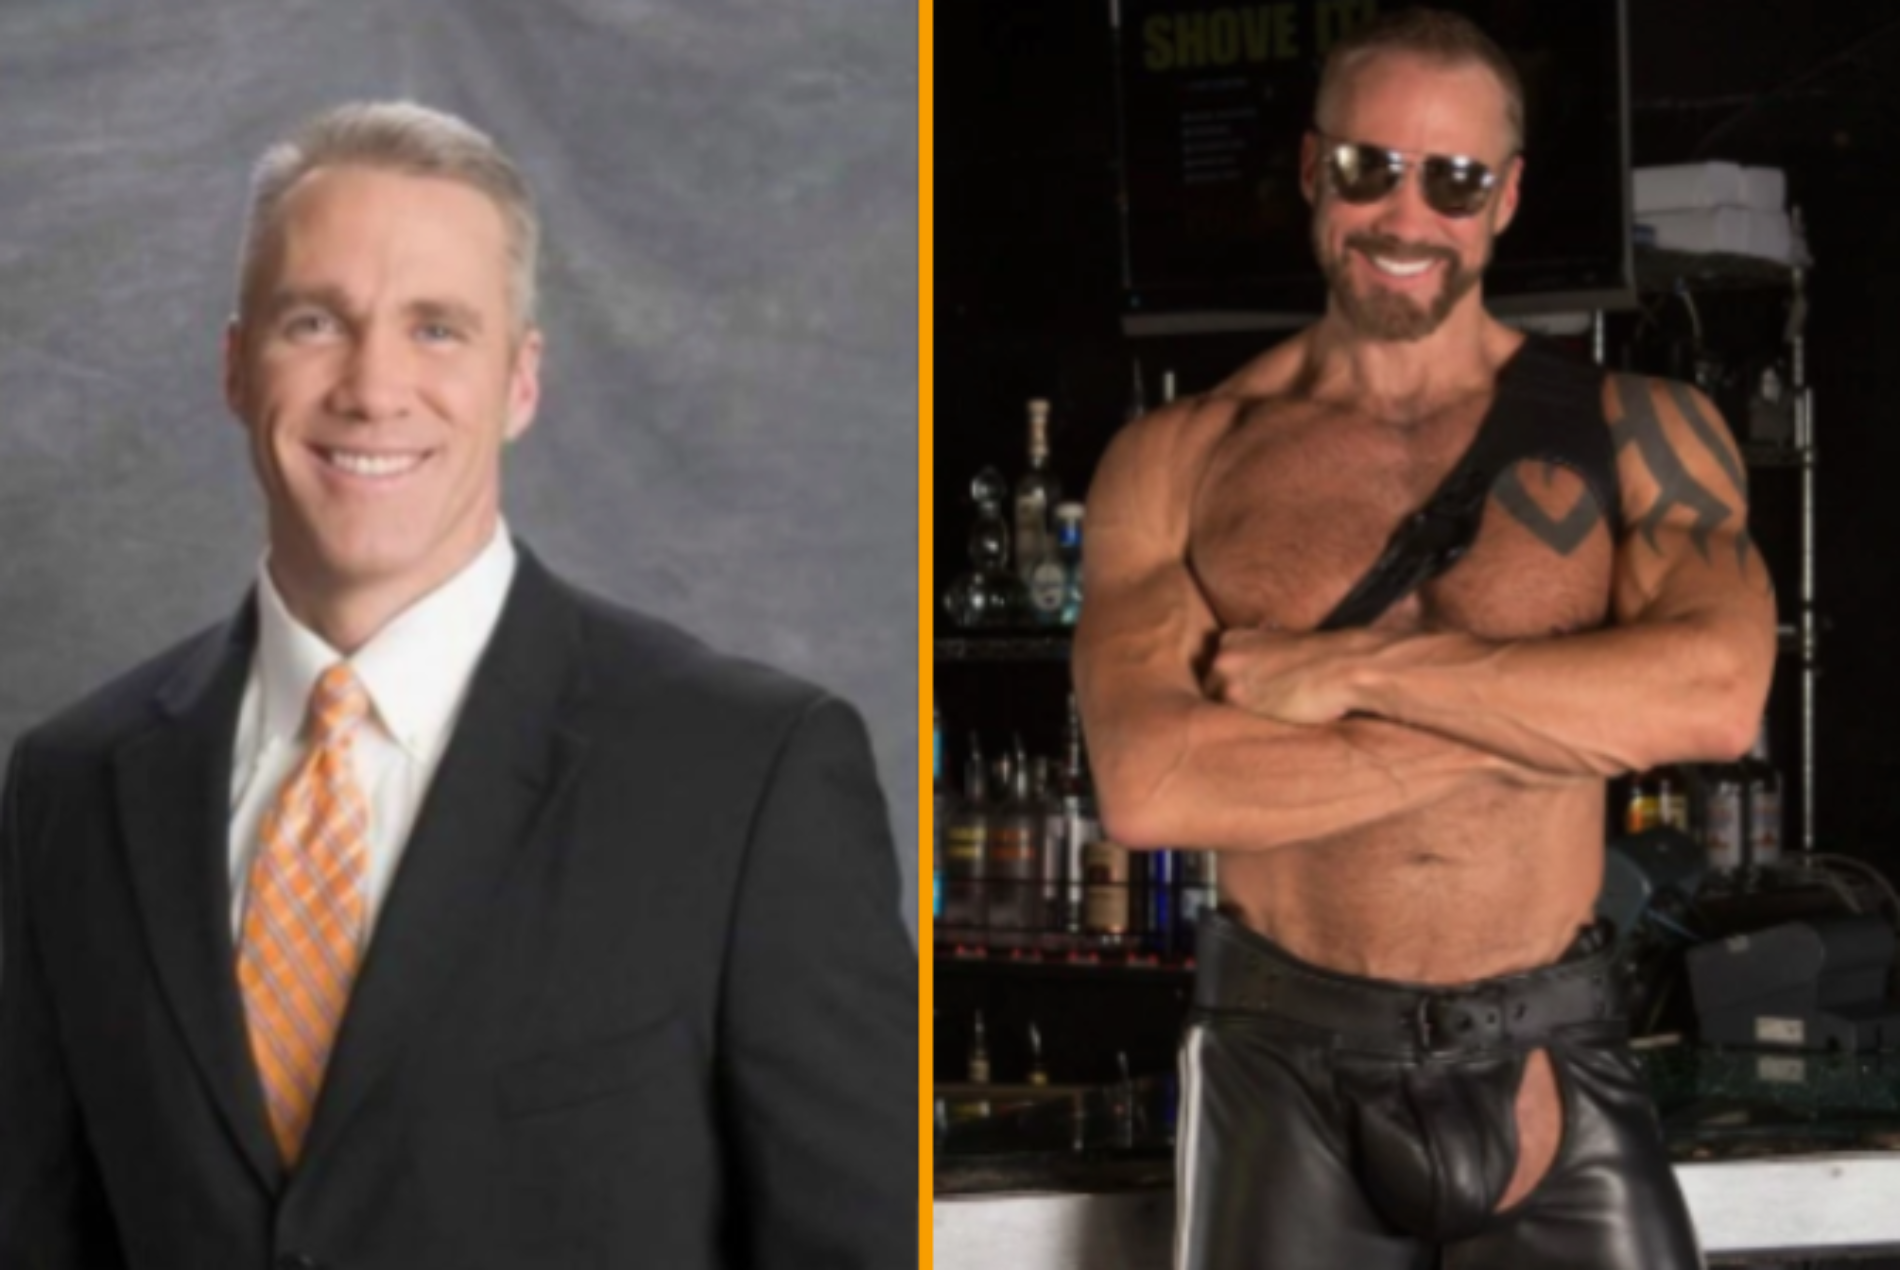 Meet the Man Who Went From Being Fox News Anchor To Successful Adult Film Star